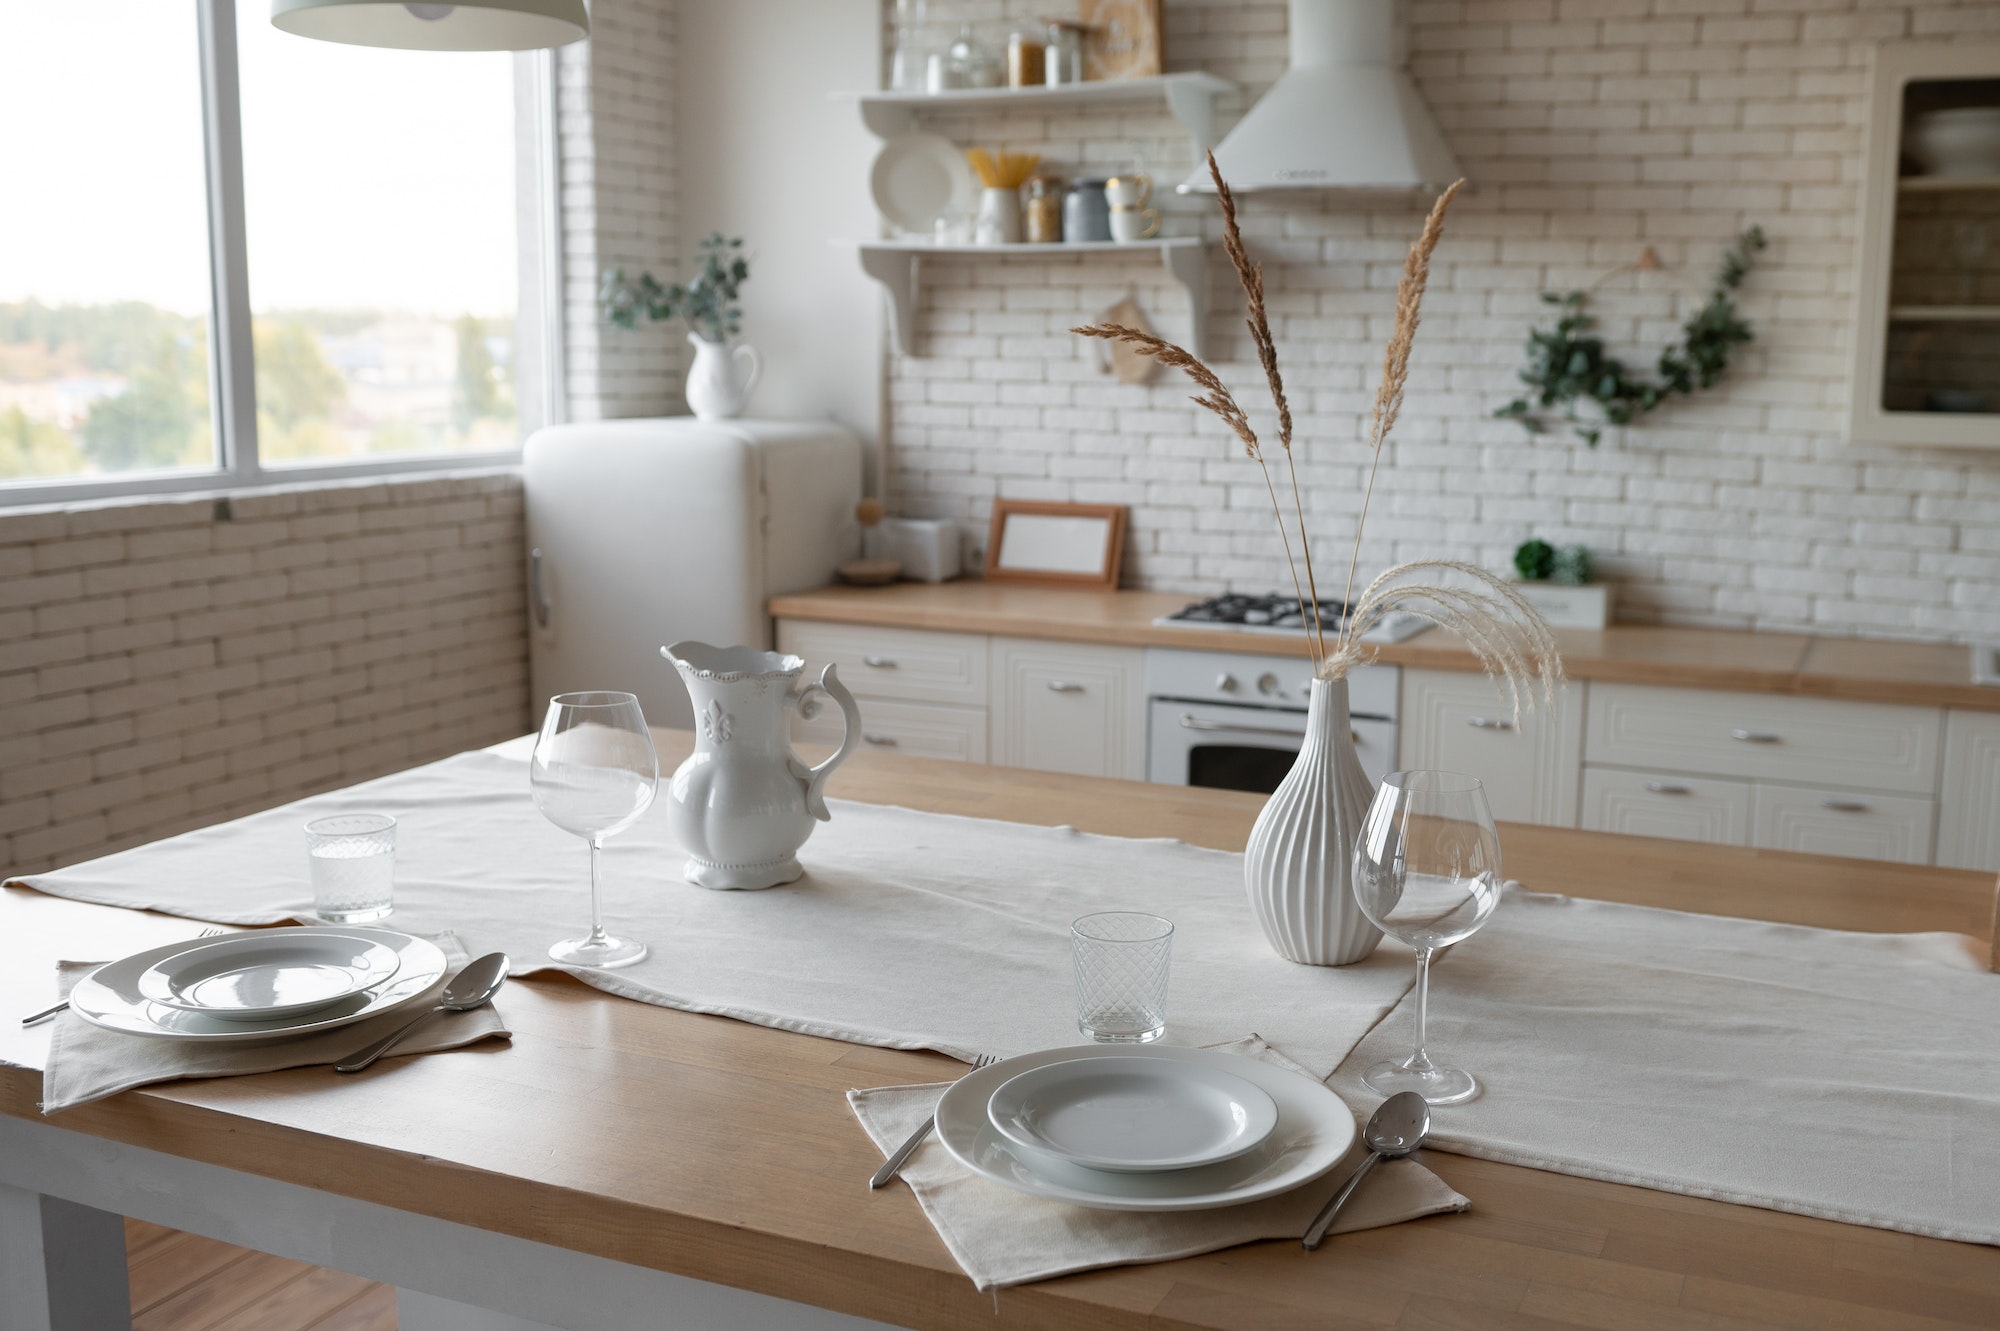 Modern bright scandi kitchen with decor and served table with dishes and plates